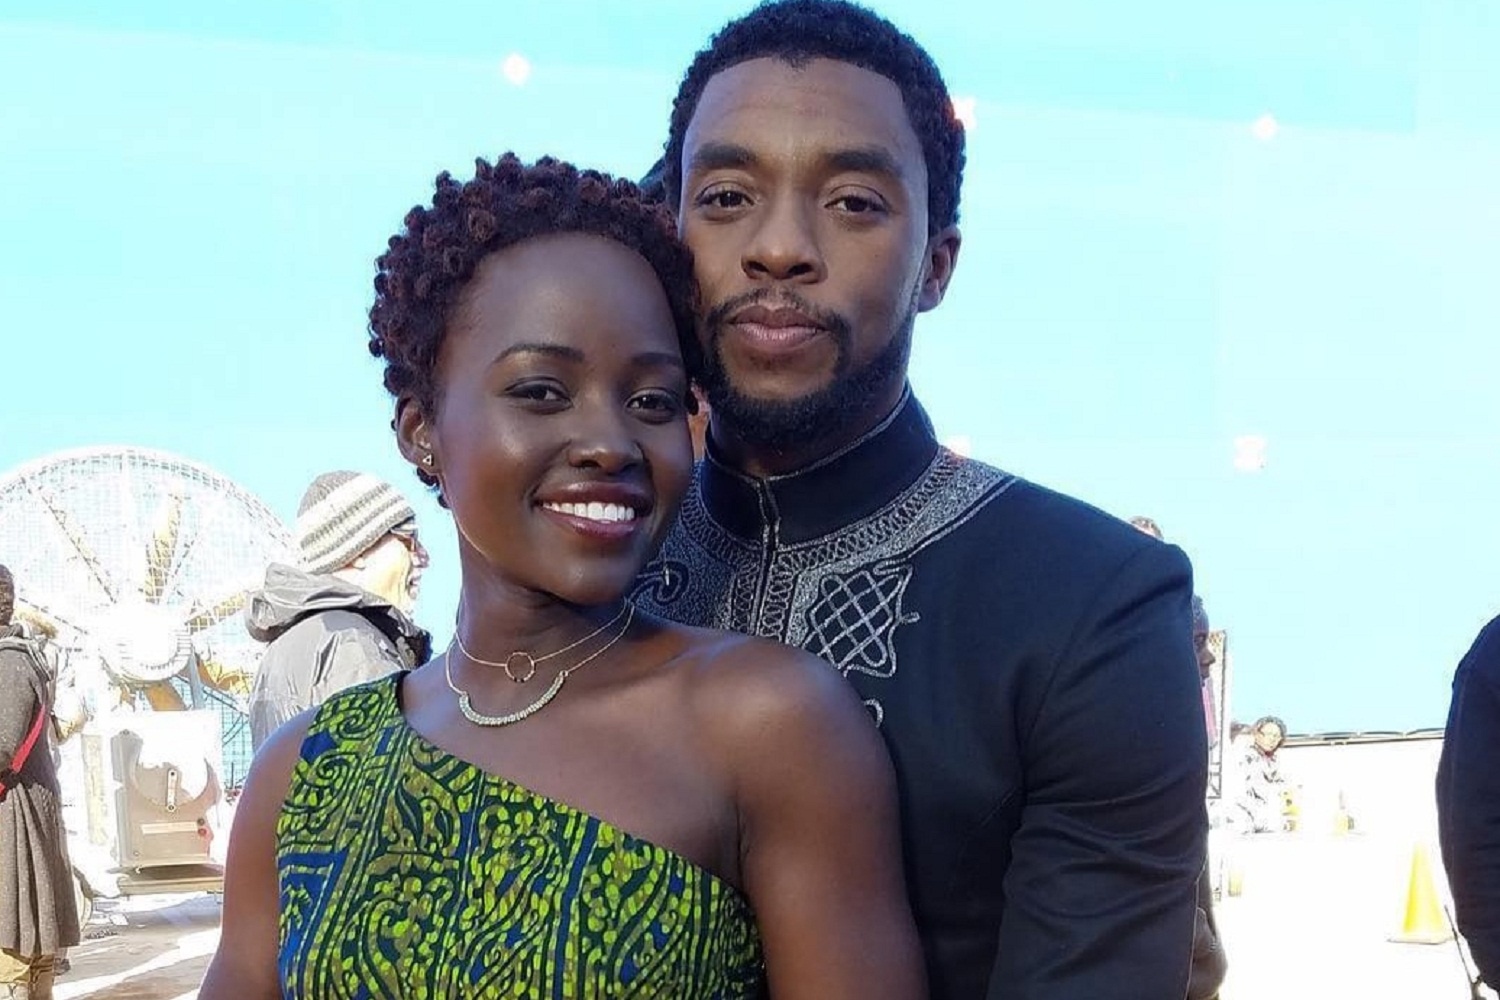 Black Panther Hollywood actor Chadwick passed away